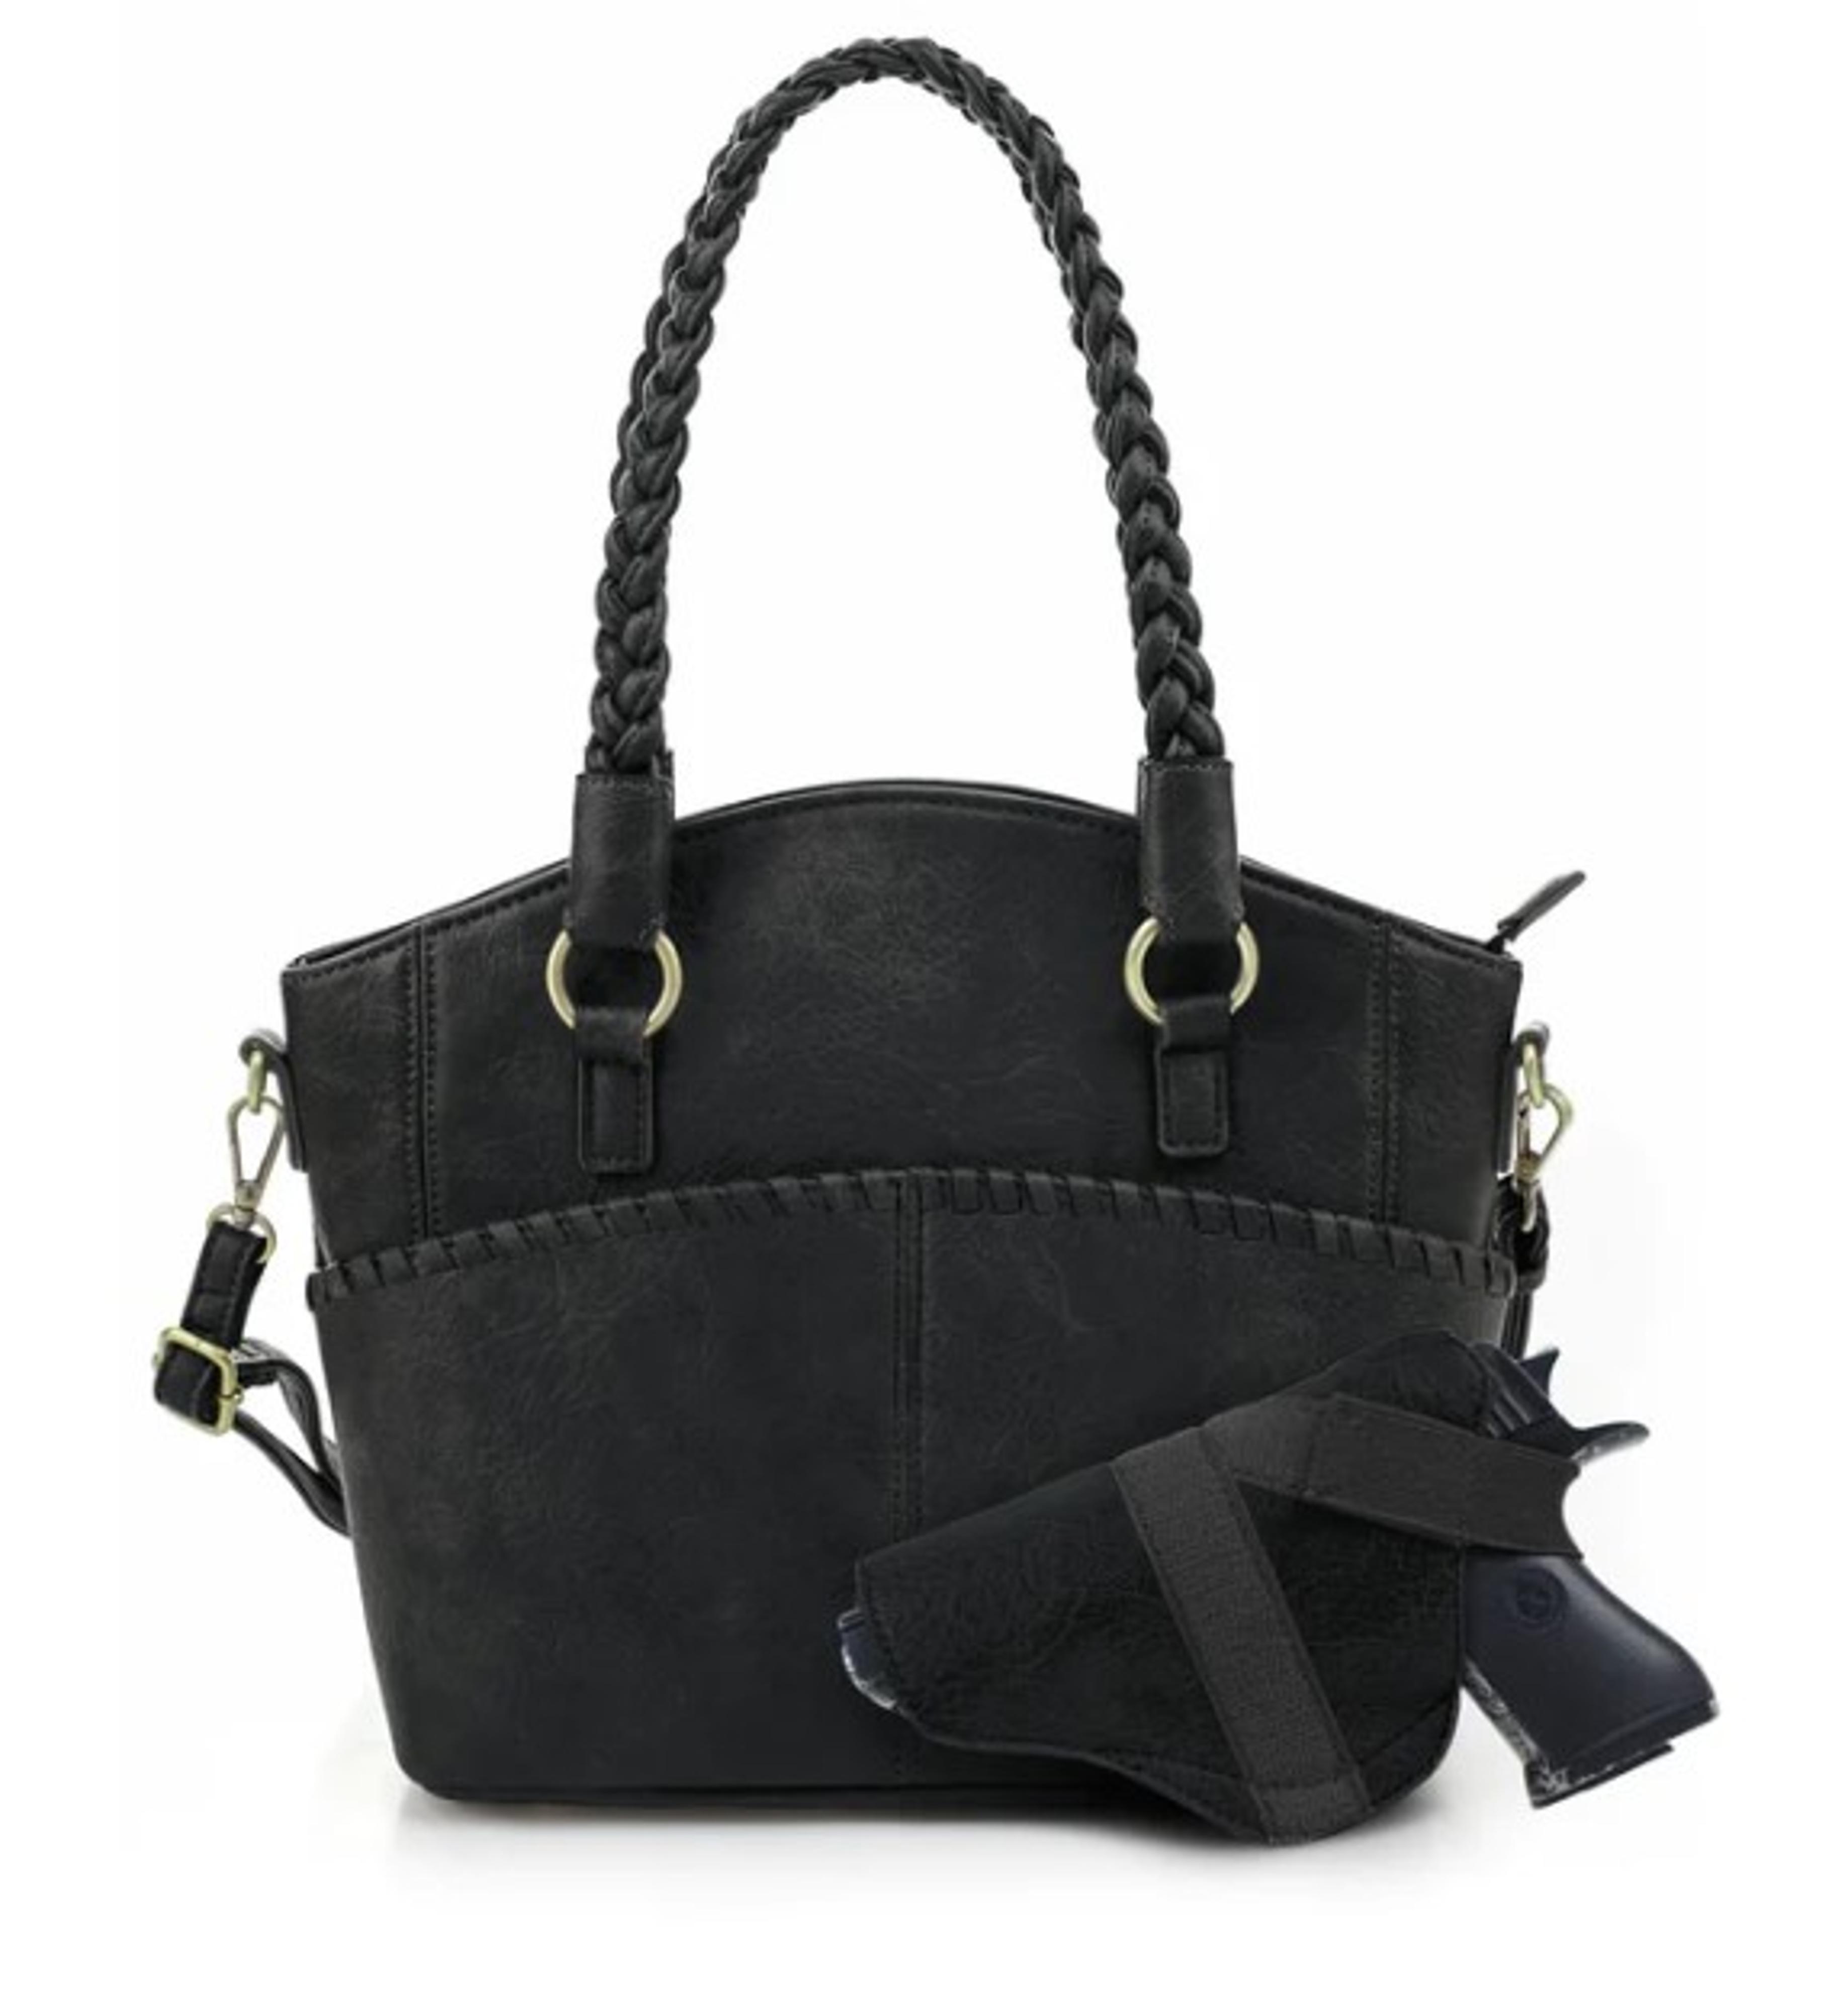  Bella Concealed Carry Tote